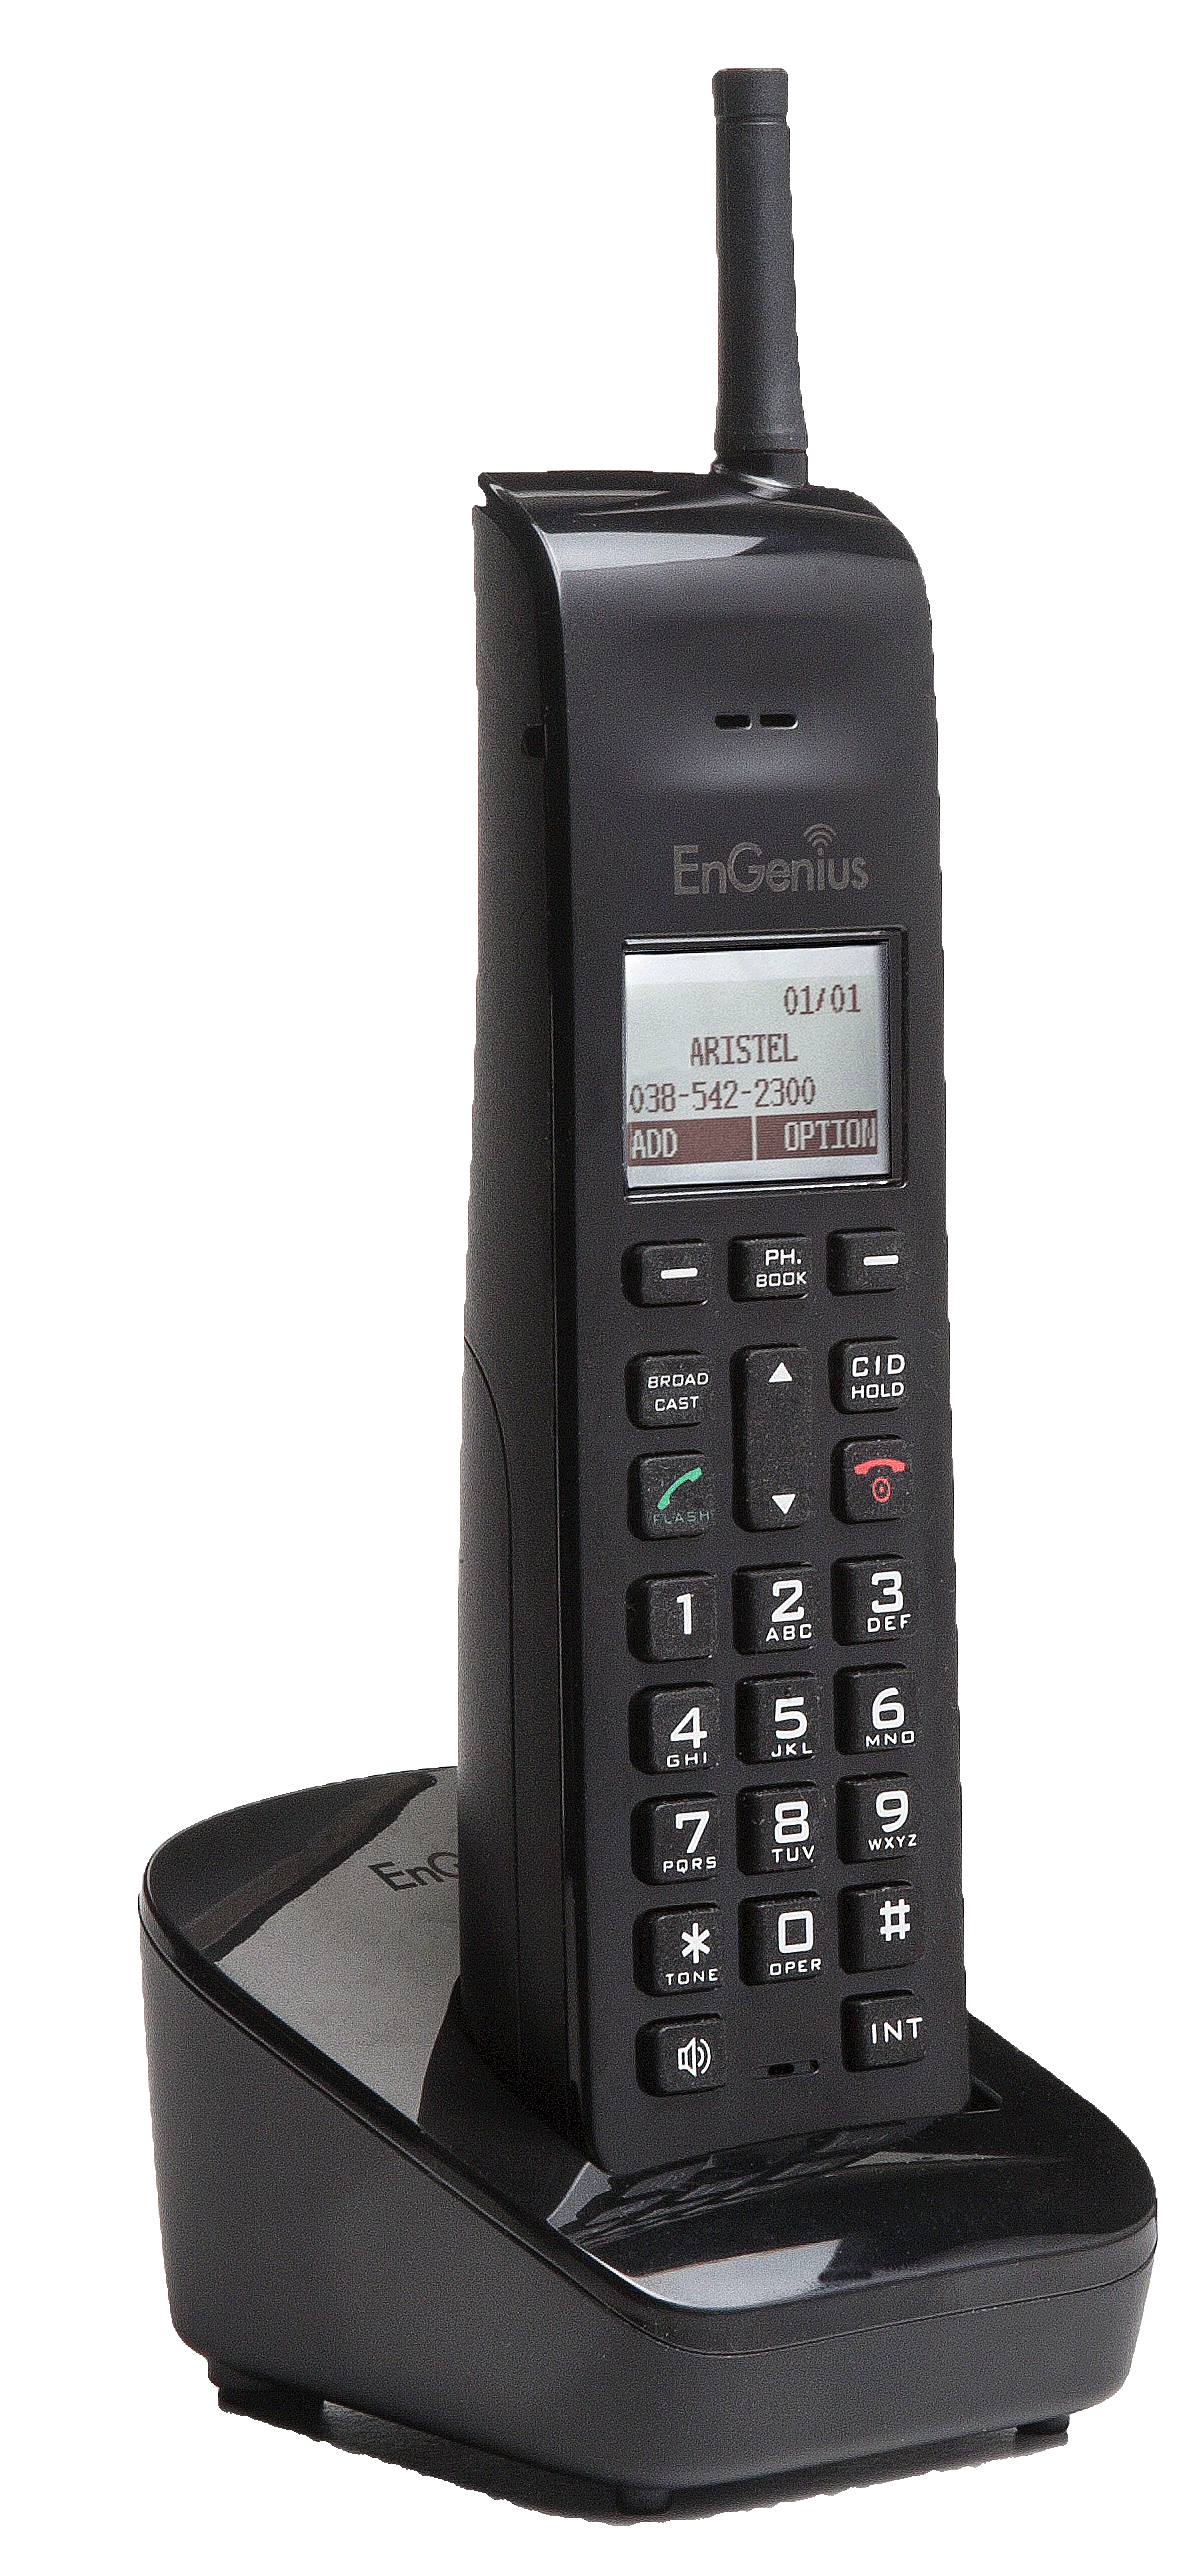 SN933HC Handset and Charger - EnGenius SN933, black colour, side view.